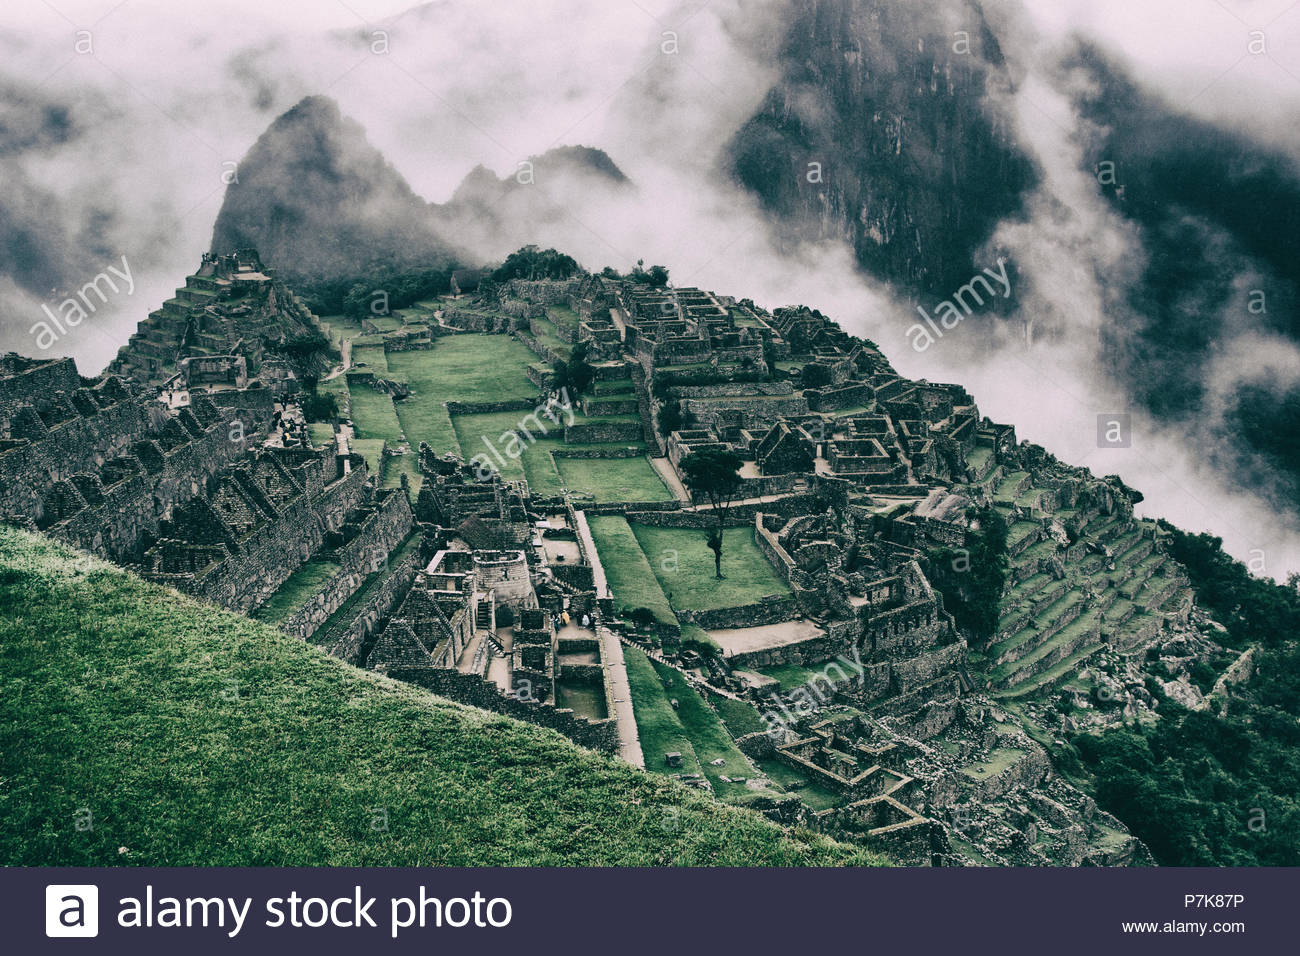 Classic Of The Ancient Mysterious City Machu Picchu With